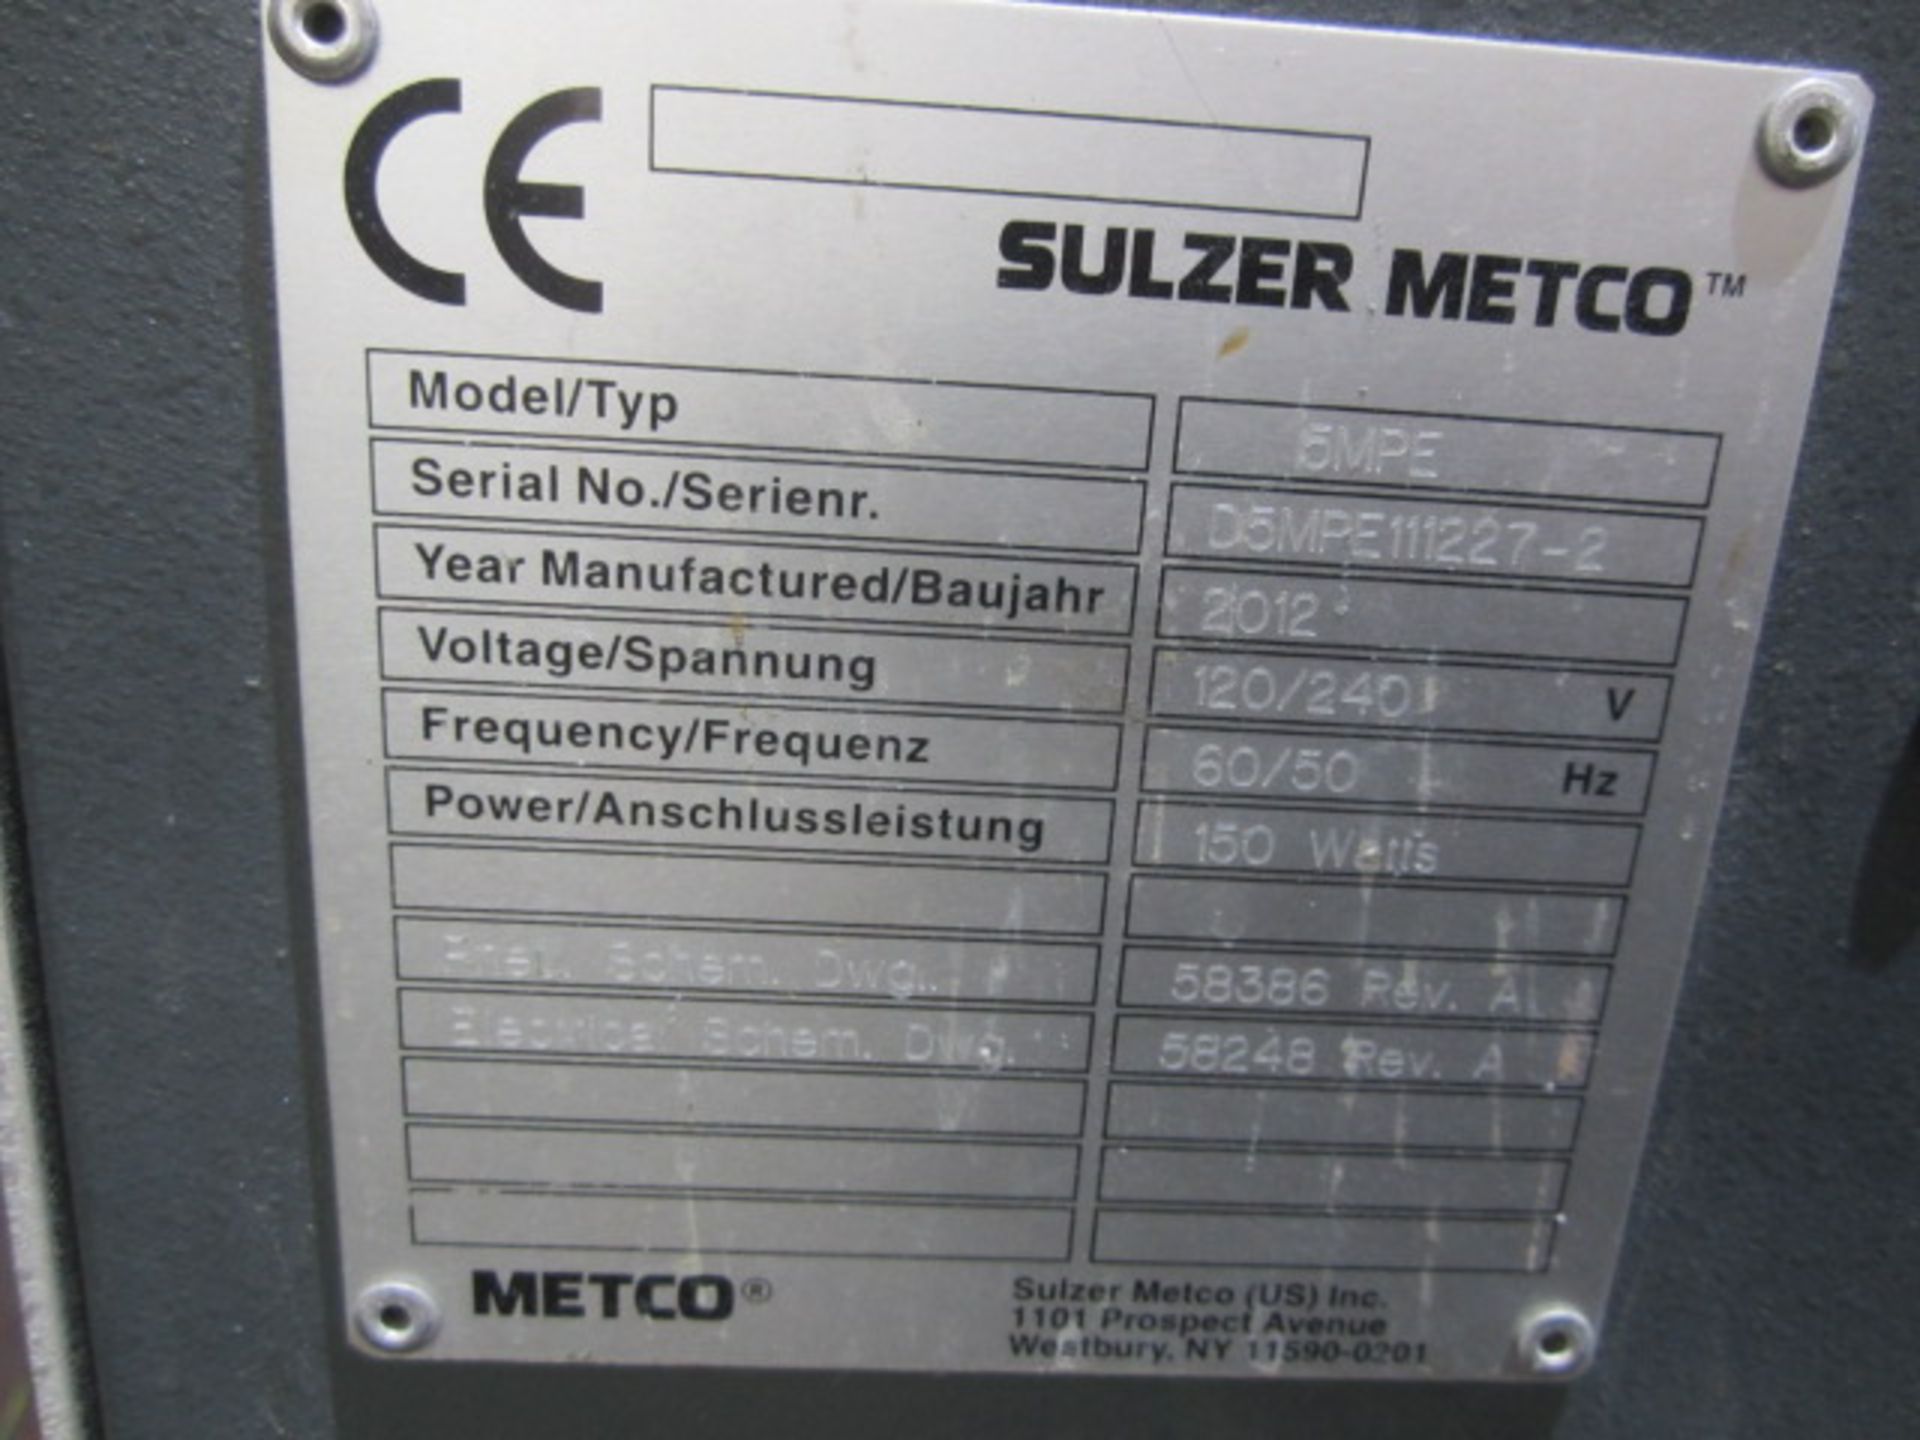 Sulzer Metco 5MPE powder feed unit, serial no. D5MPE111227-2 (2012) Please note: Acceptance of the - Image 5 of 5